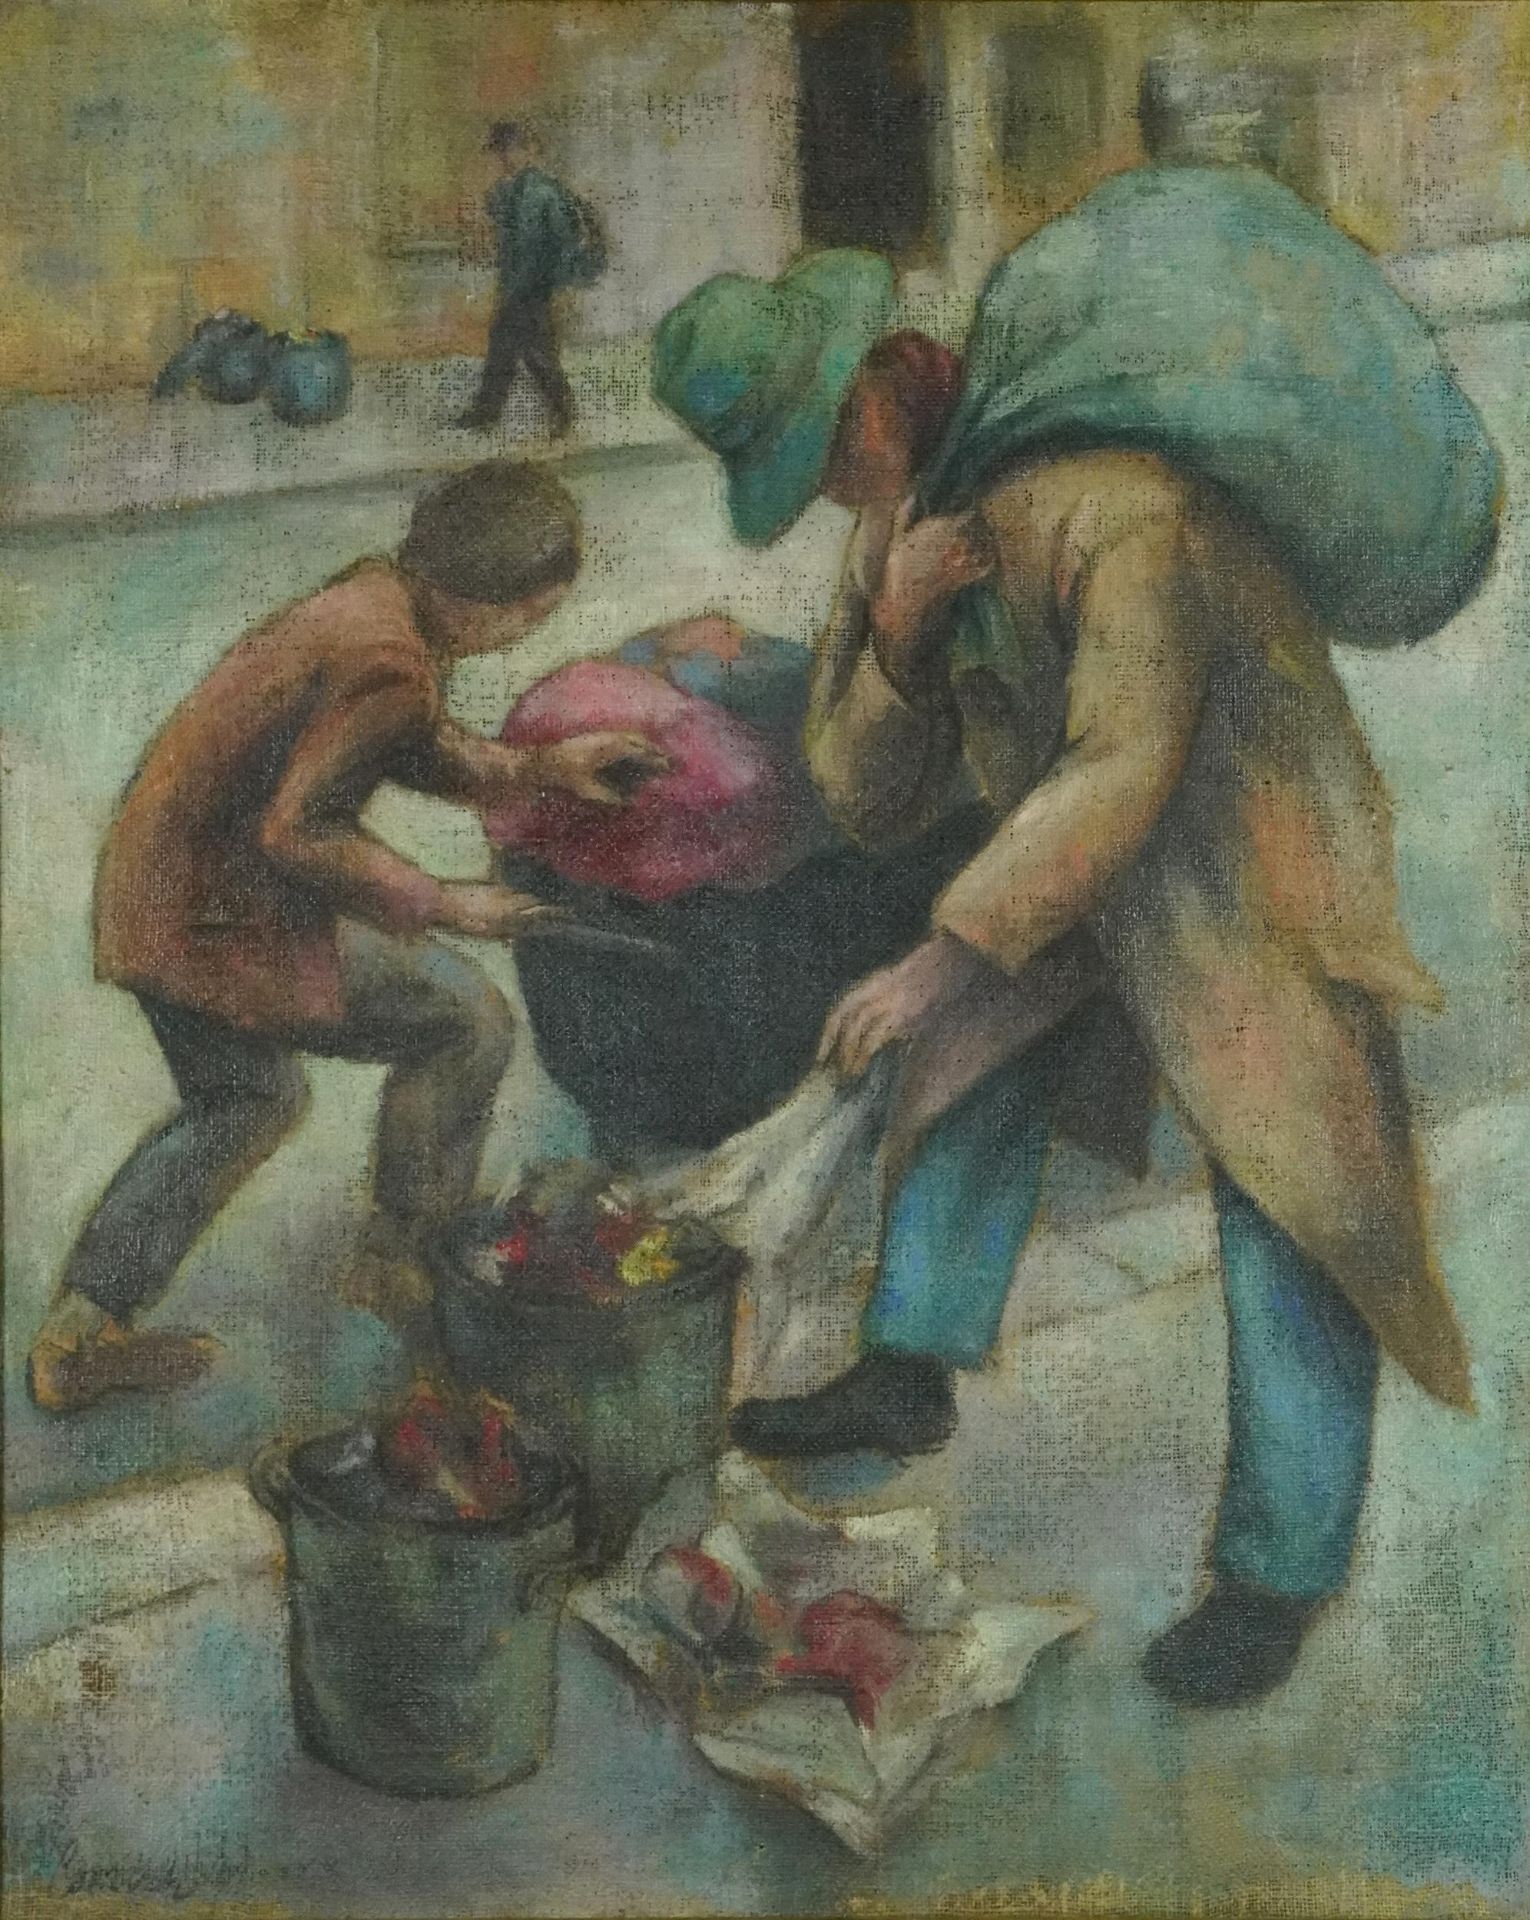 Attributed to Norman Cornish - Street life, post-war British oil on canvas, inscribed verso, framed,